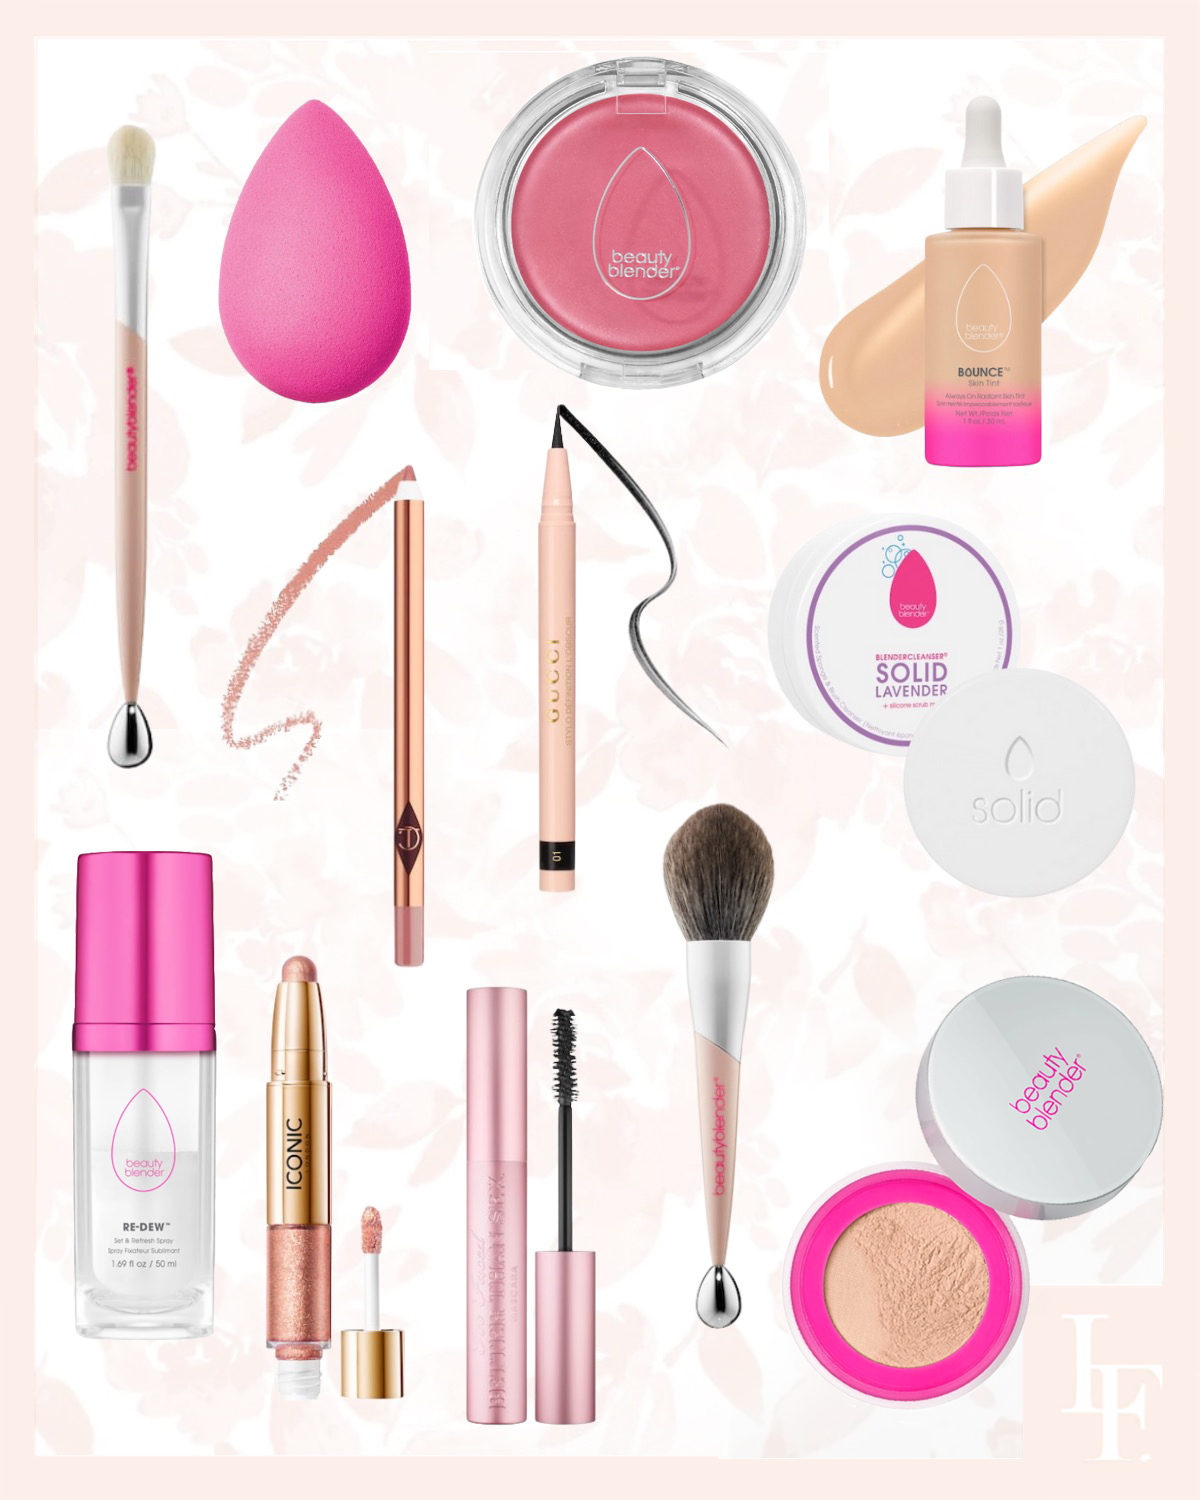 Best make-up round up for spring from Sephora and Beauty Blender. By Lombard & Fifth, Veronica Levy.